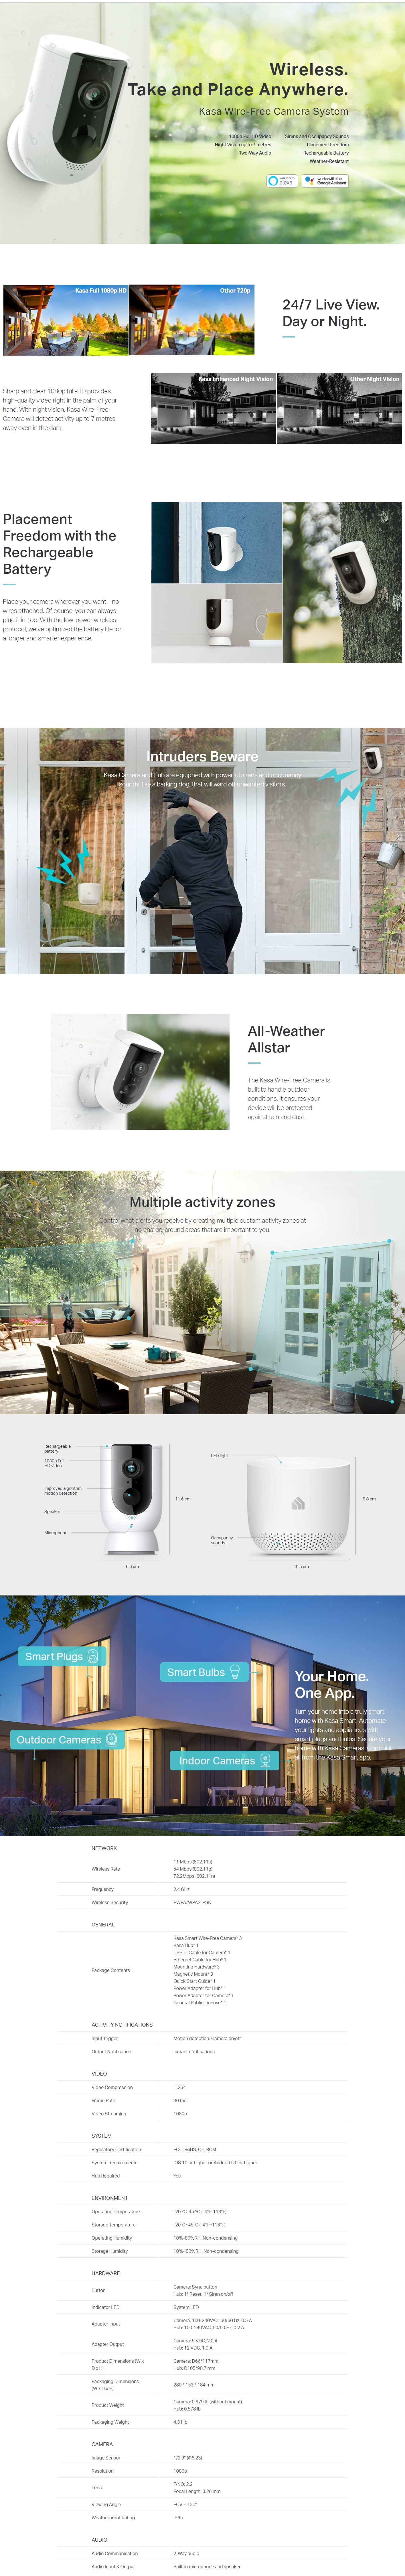 A large marketing image providing additional information about the product TP-LINK KC300S3 Kasa Outdoor Surveillance Camera Pack - Additional alt info not provided